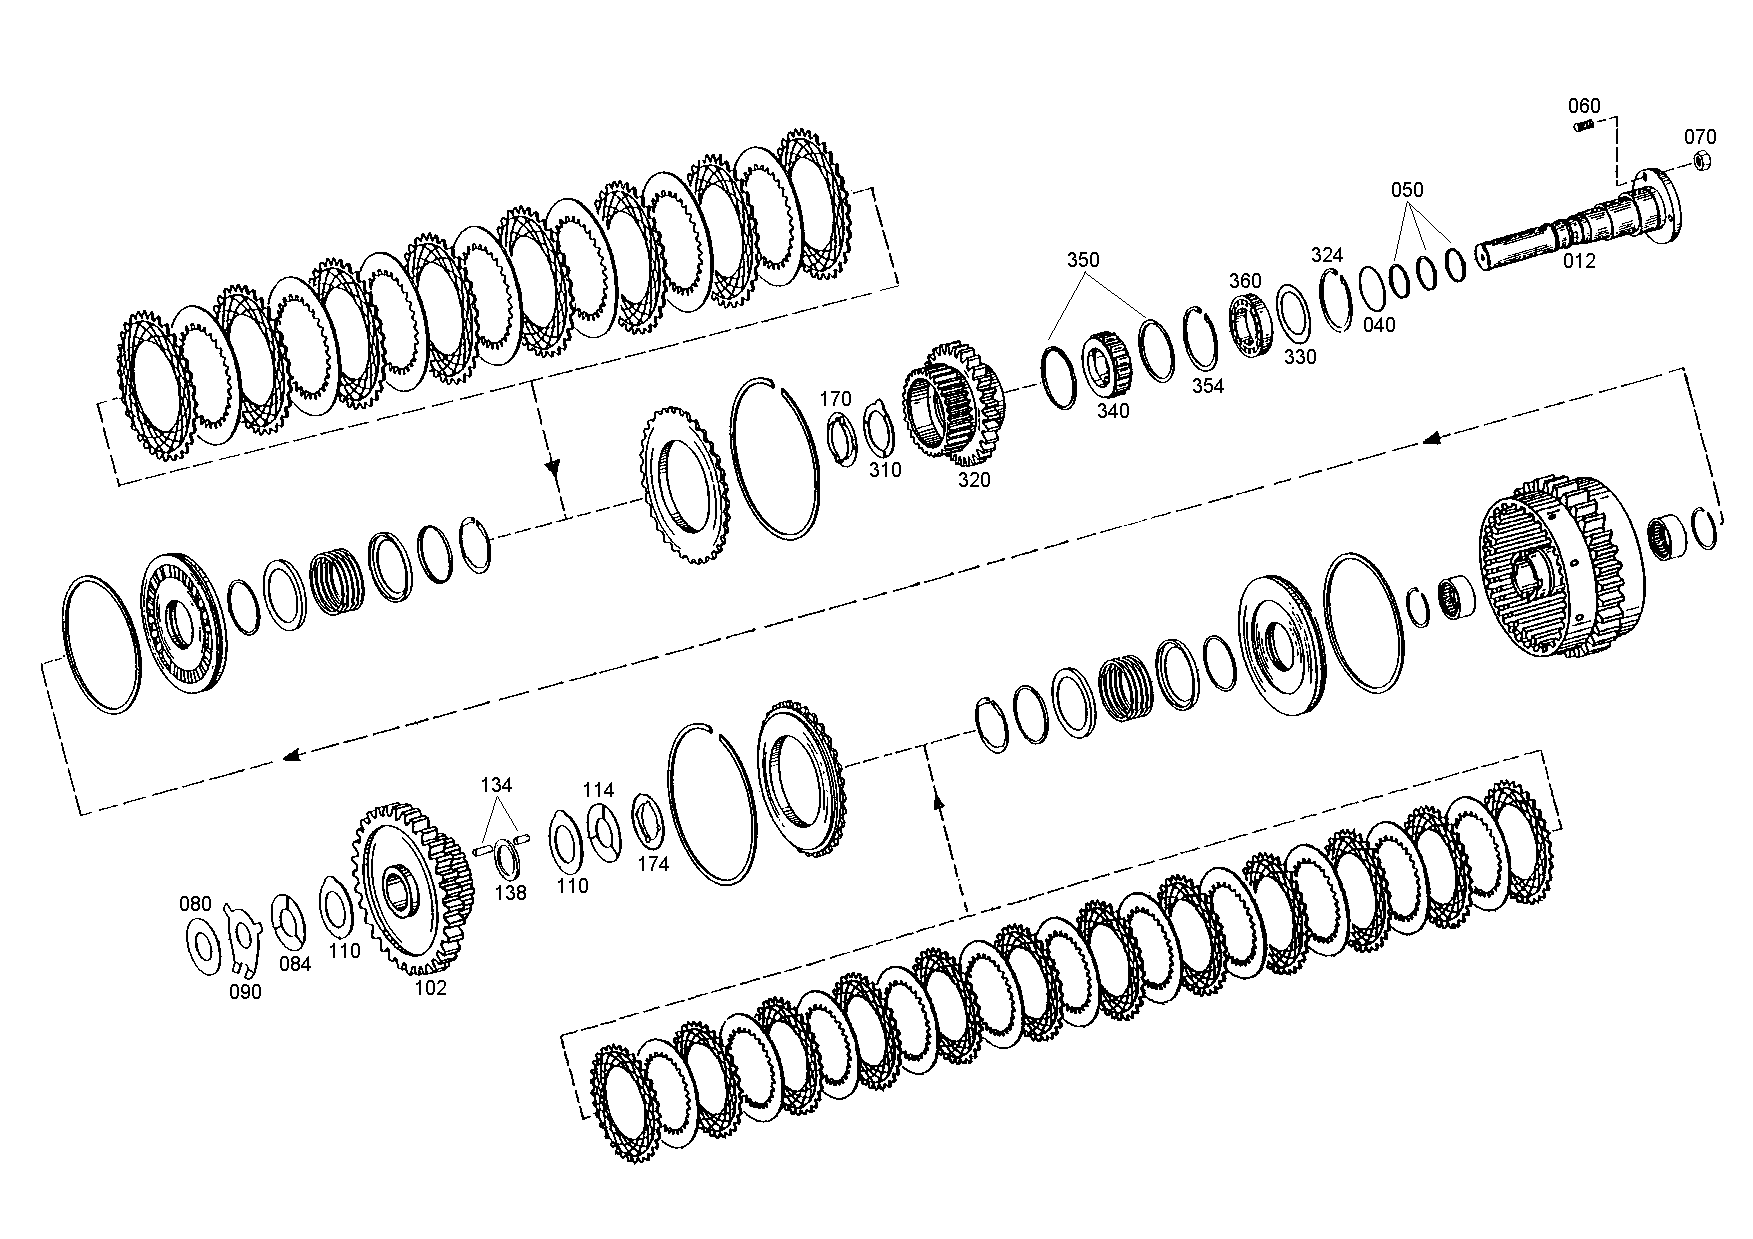 drawing for NACCO-IRV 1390849 - ROLLER CAGE (figure 4)